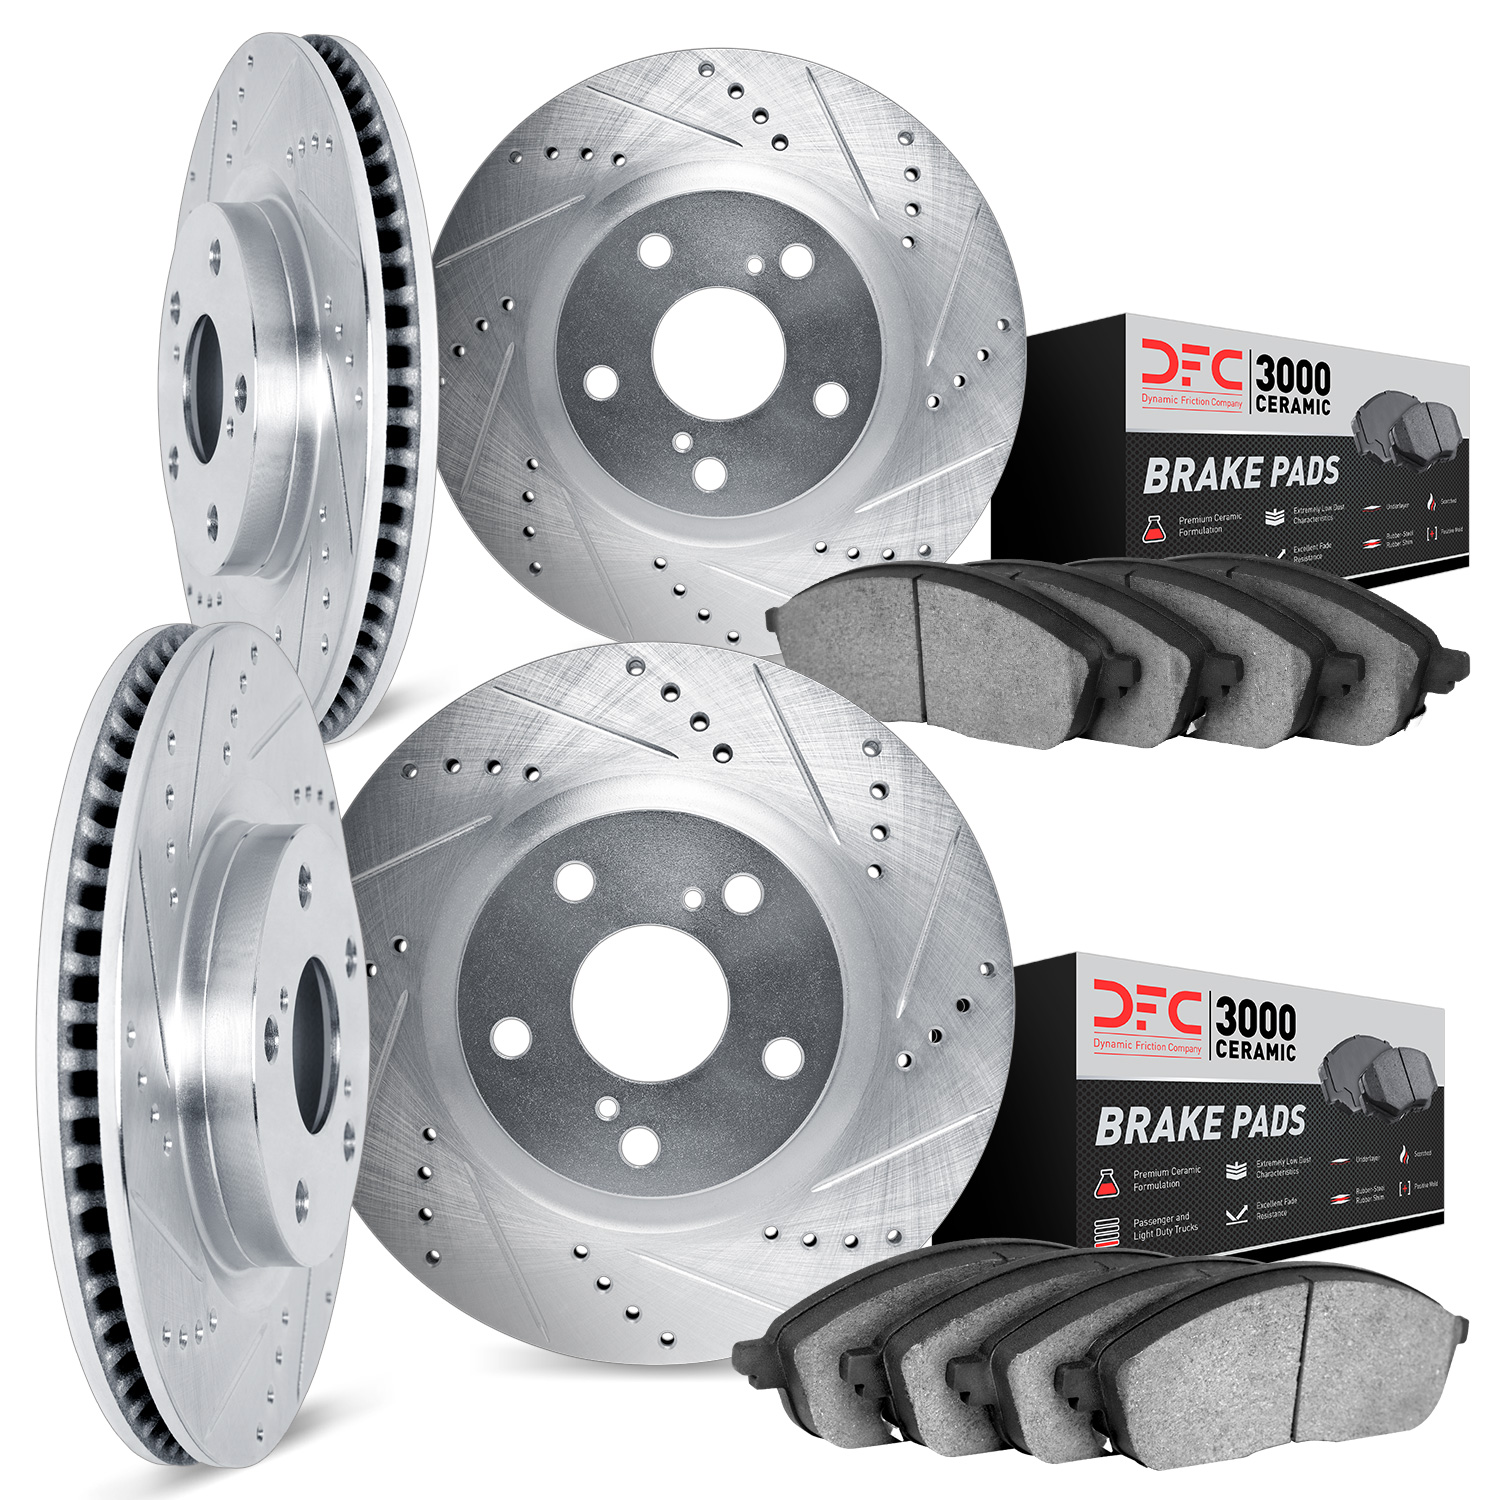 7304-80012 Drilled/Slotted Brake Rotor with 3000-Series Ceramic Brake Pads Kit [Silver], 2004-2006 Ford/Lincoln/Mercury/Mazda, P